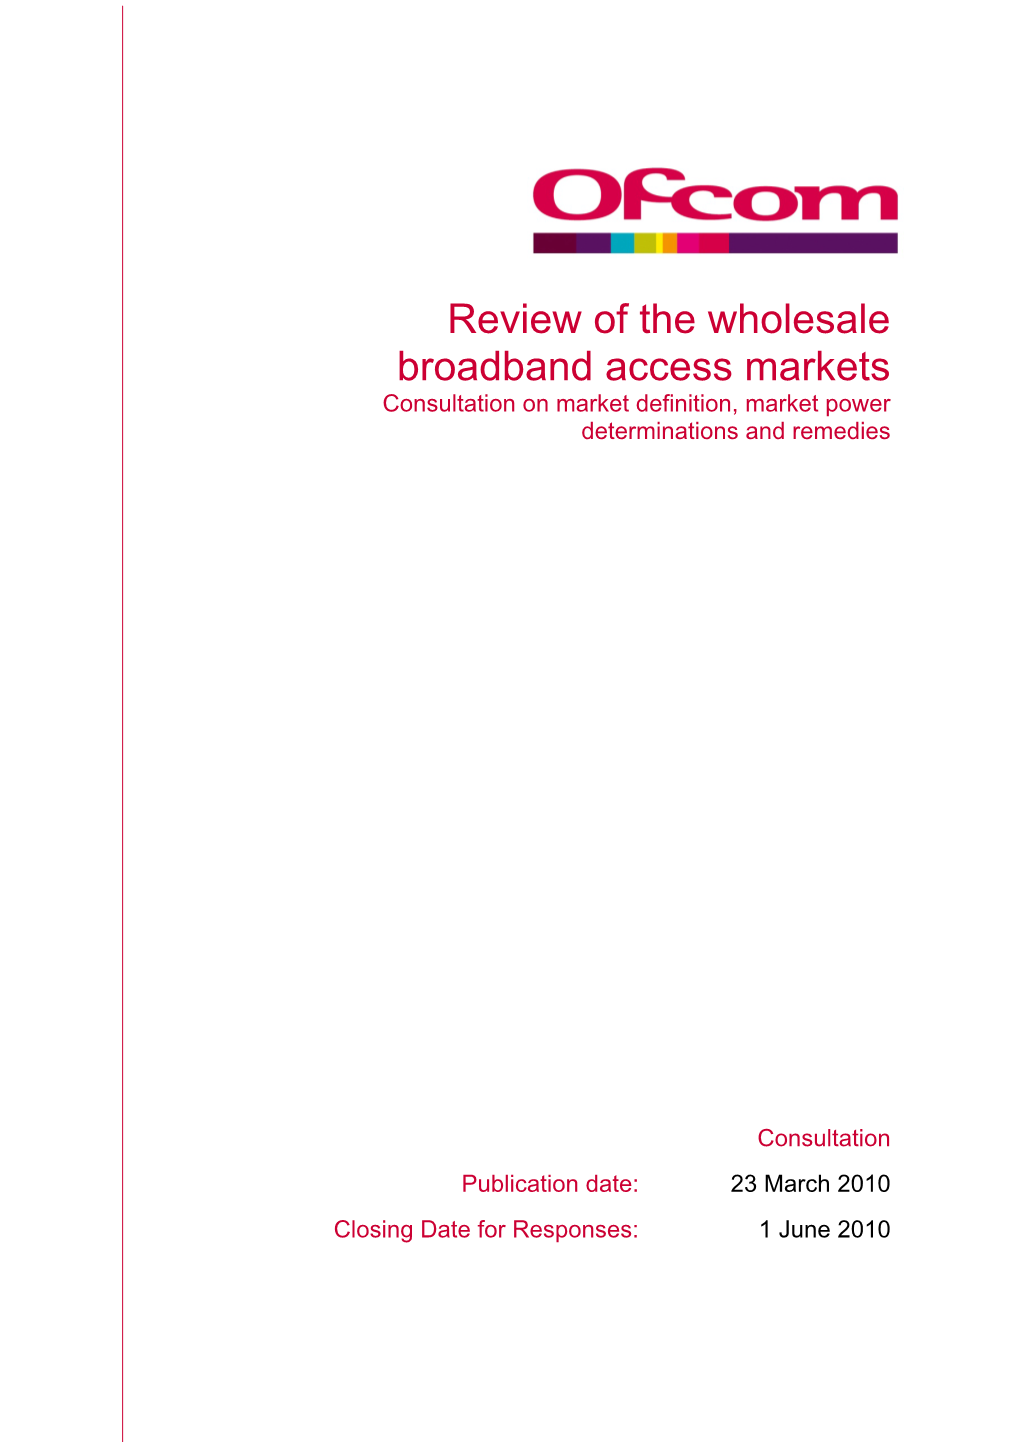 Review of the Wholesale Broadband Access Markets Consultation on Market Definition, Market Power Determinations and Remedies